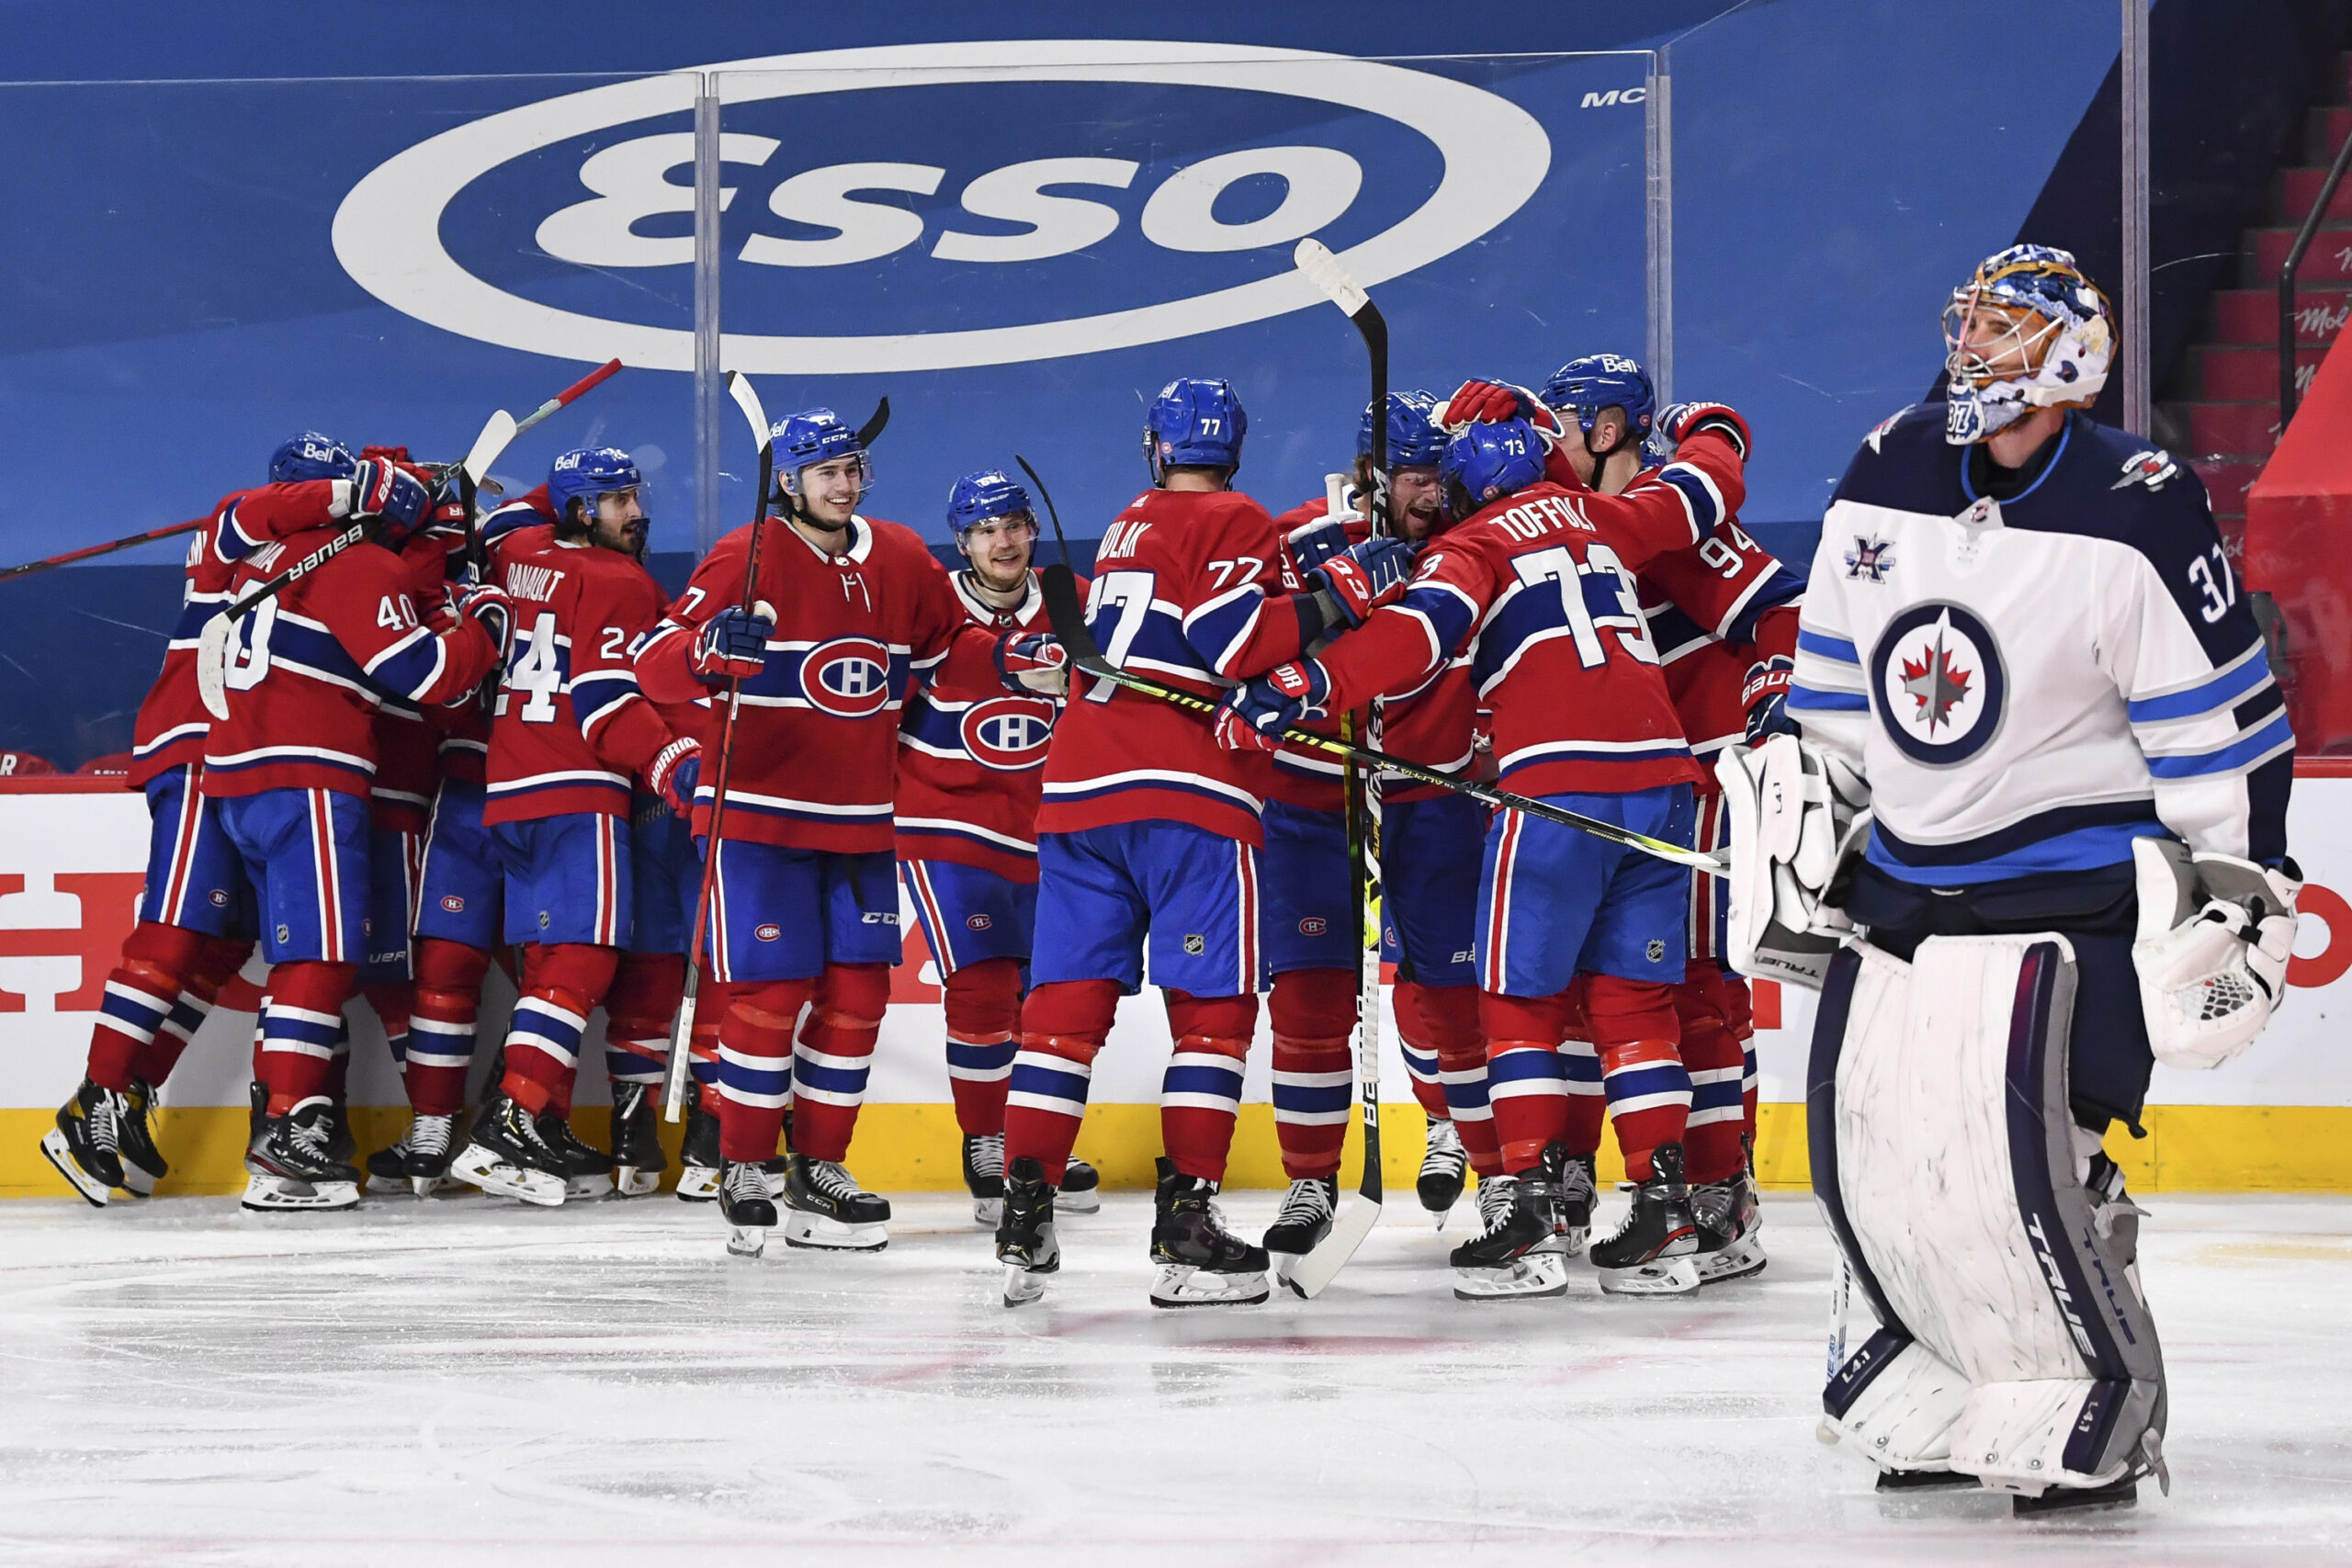 Kucherov Calls Out Canadiens Fans in Epic Post Game Rant